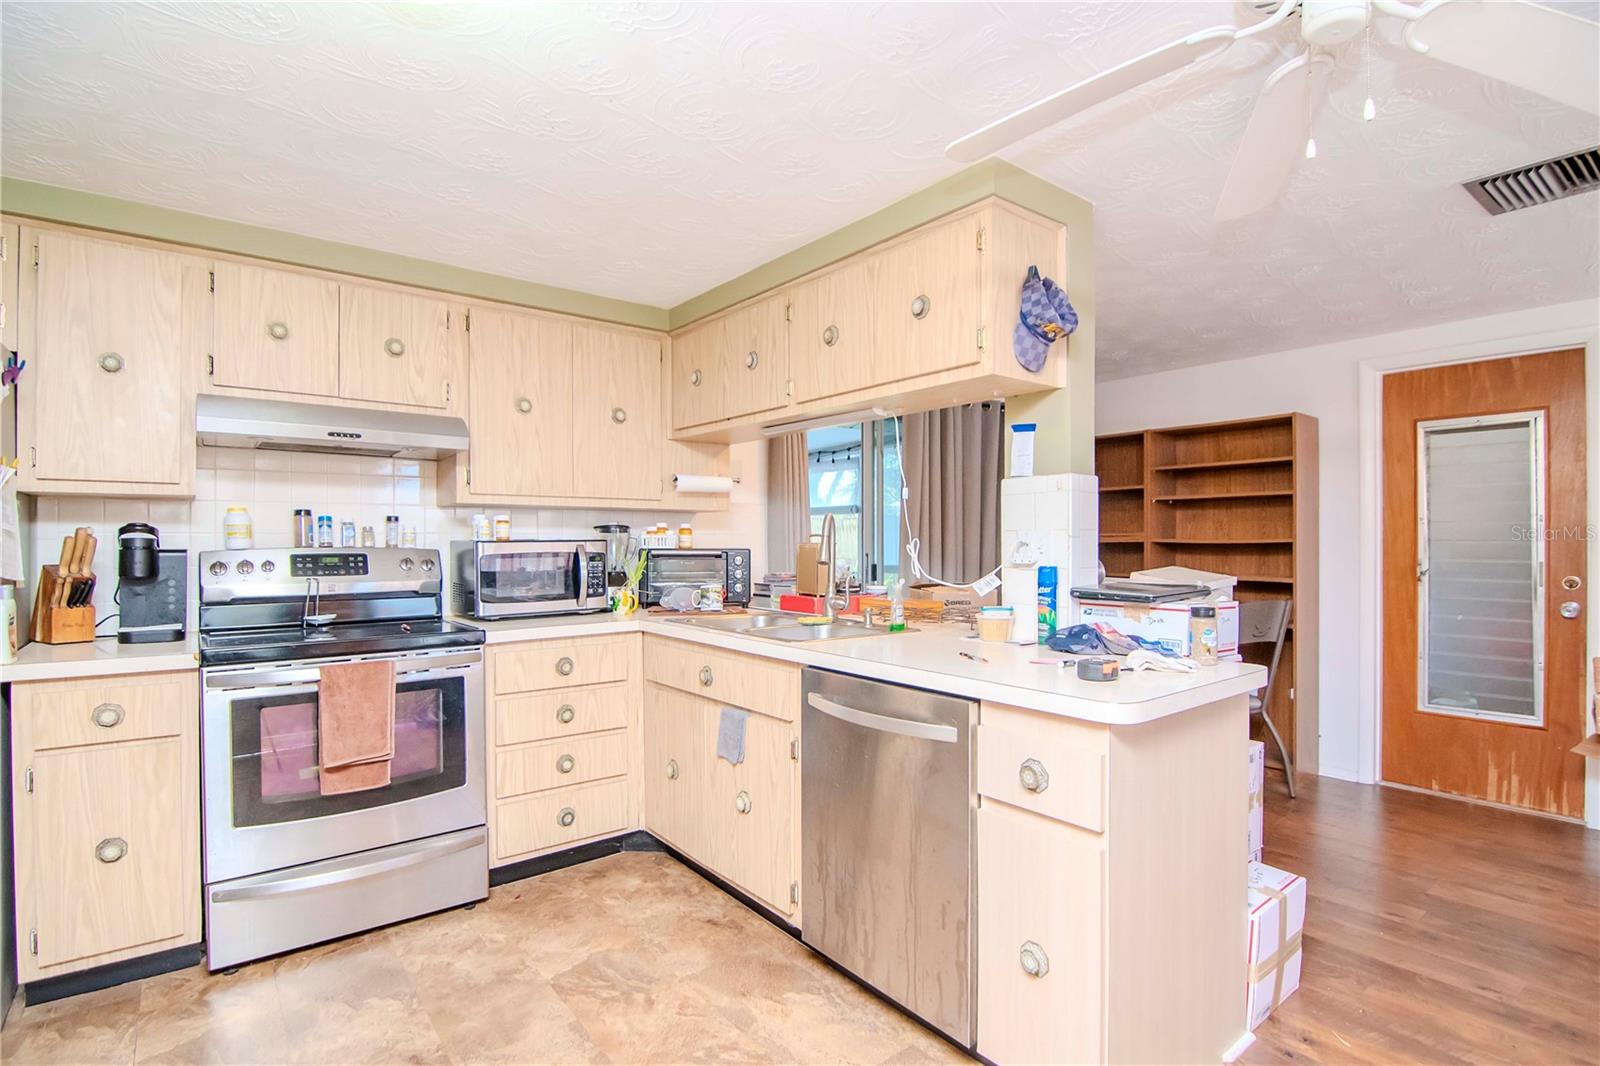 Spacious kitchen with amazing potential